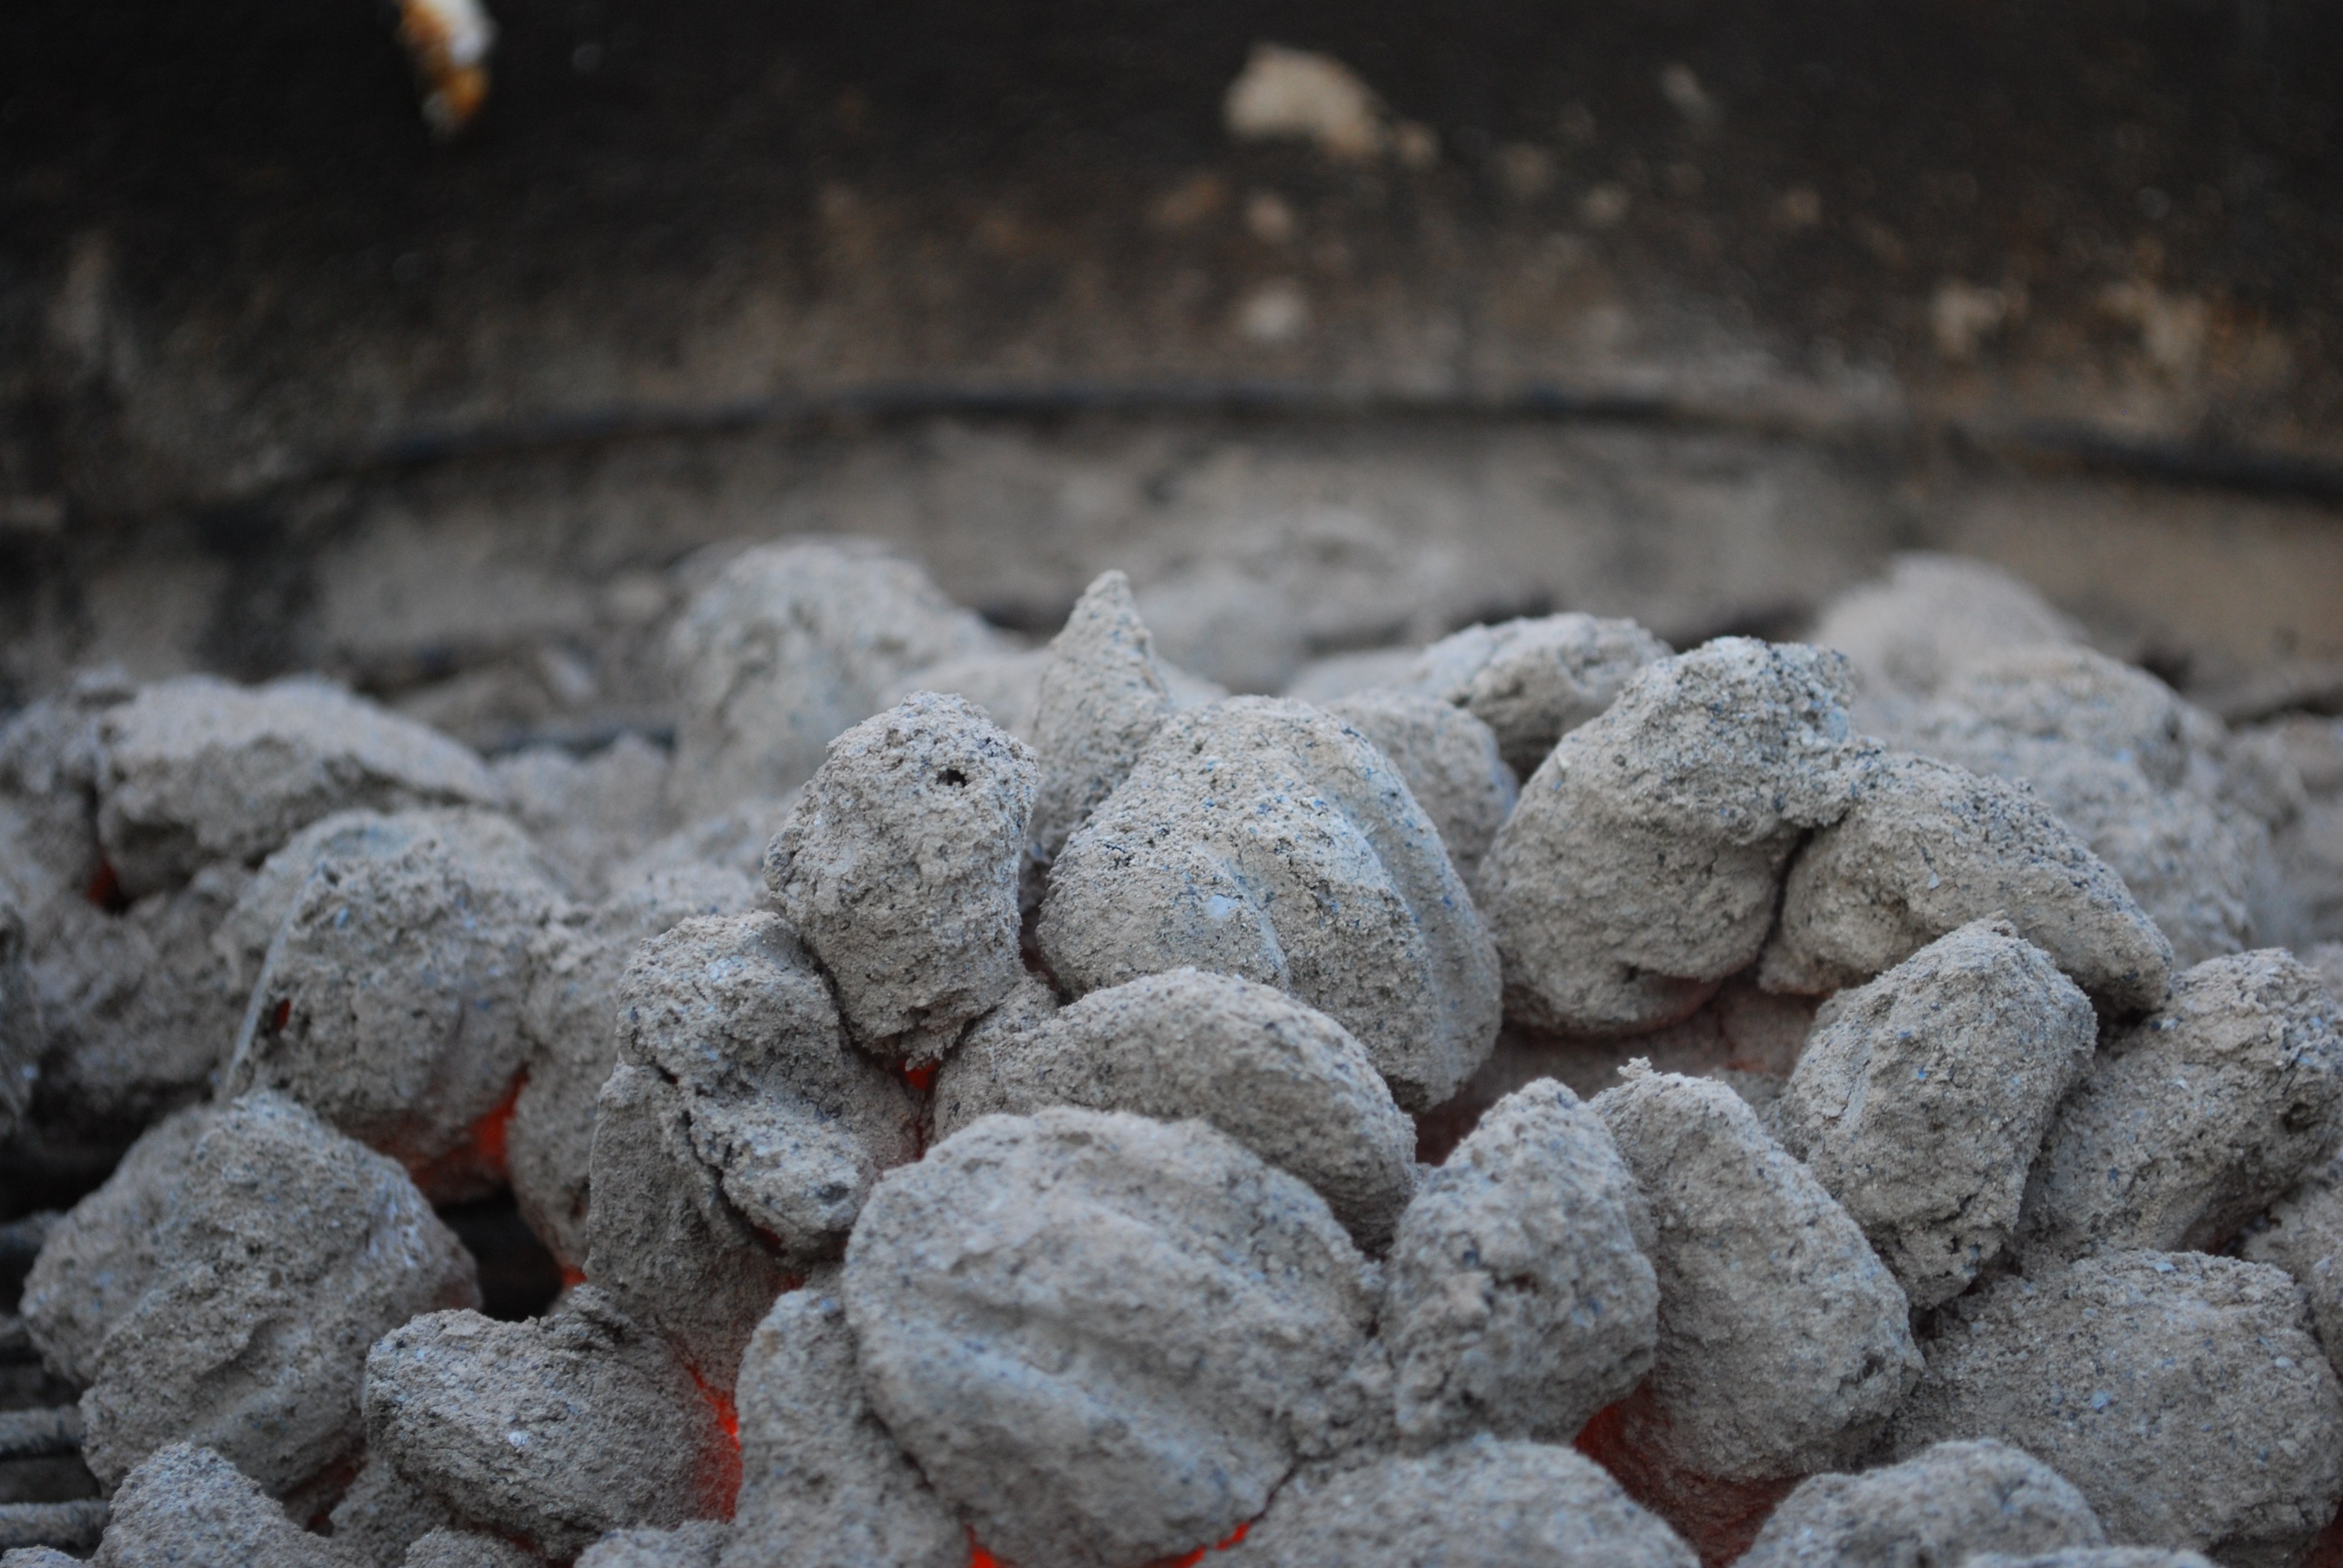 File:Smoldering charcoal briquettes.JPG - Wikimedia Commons